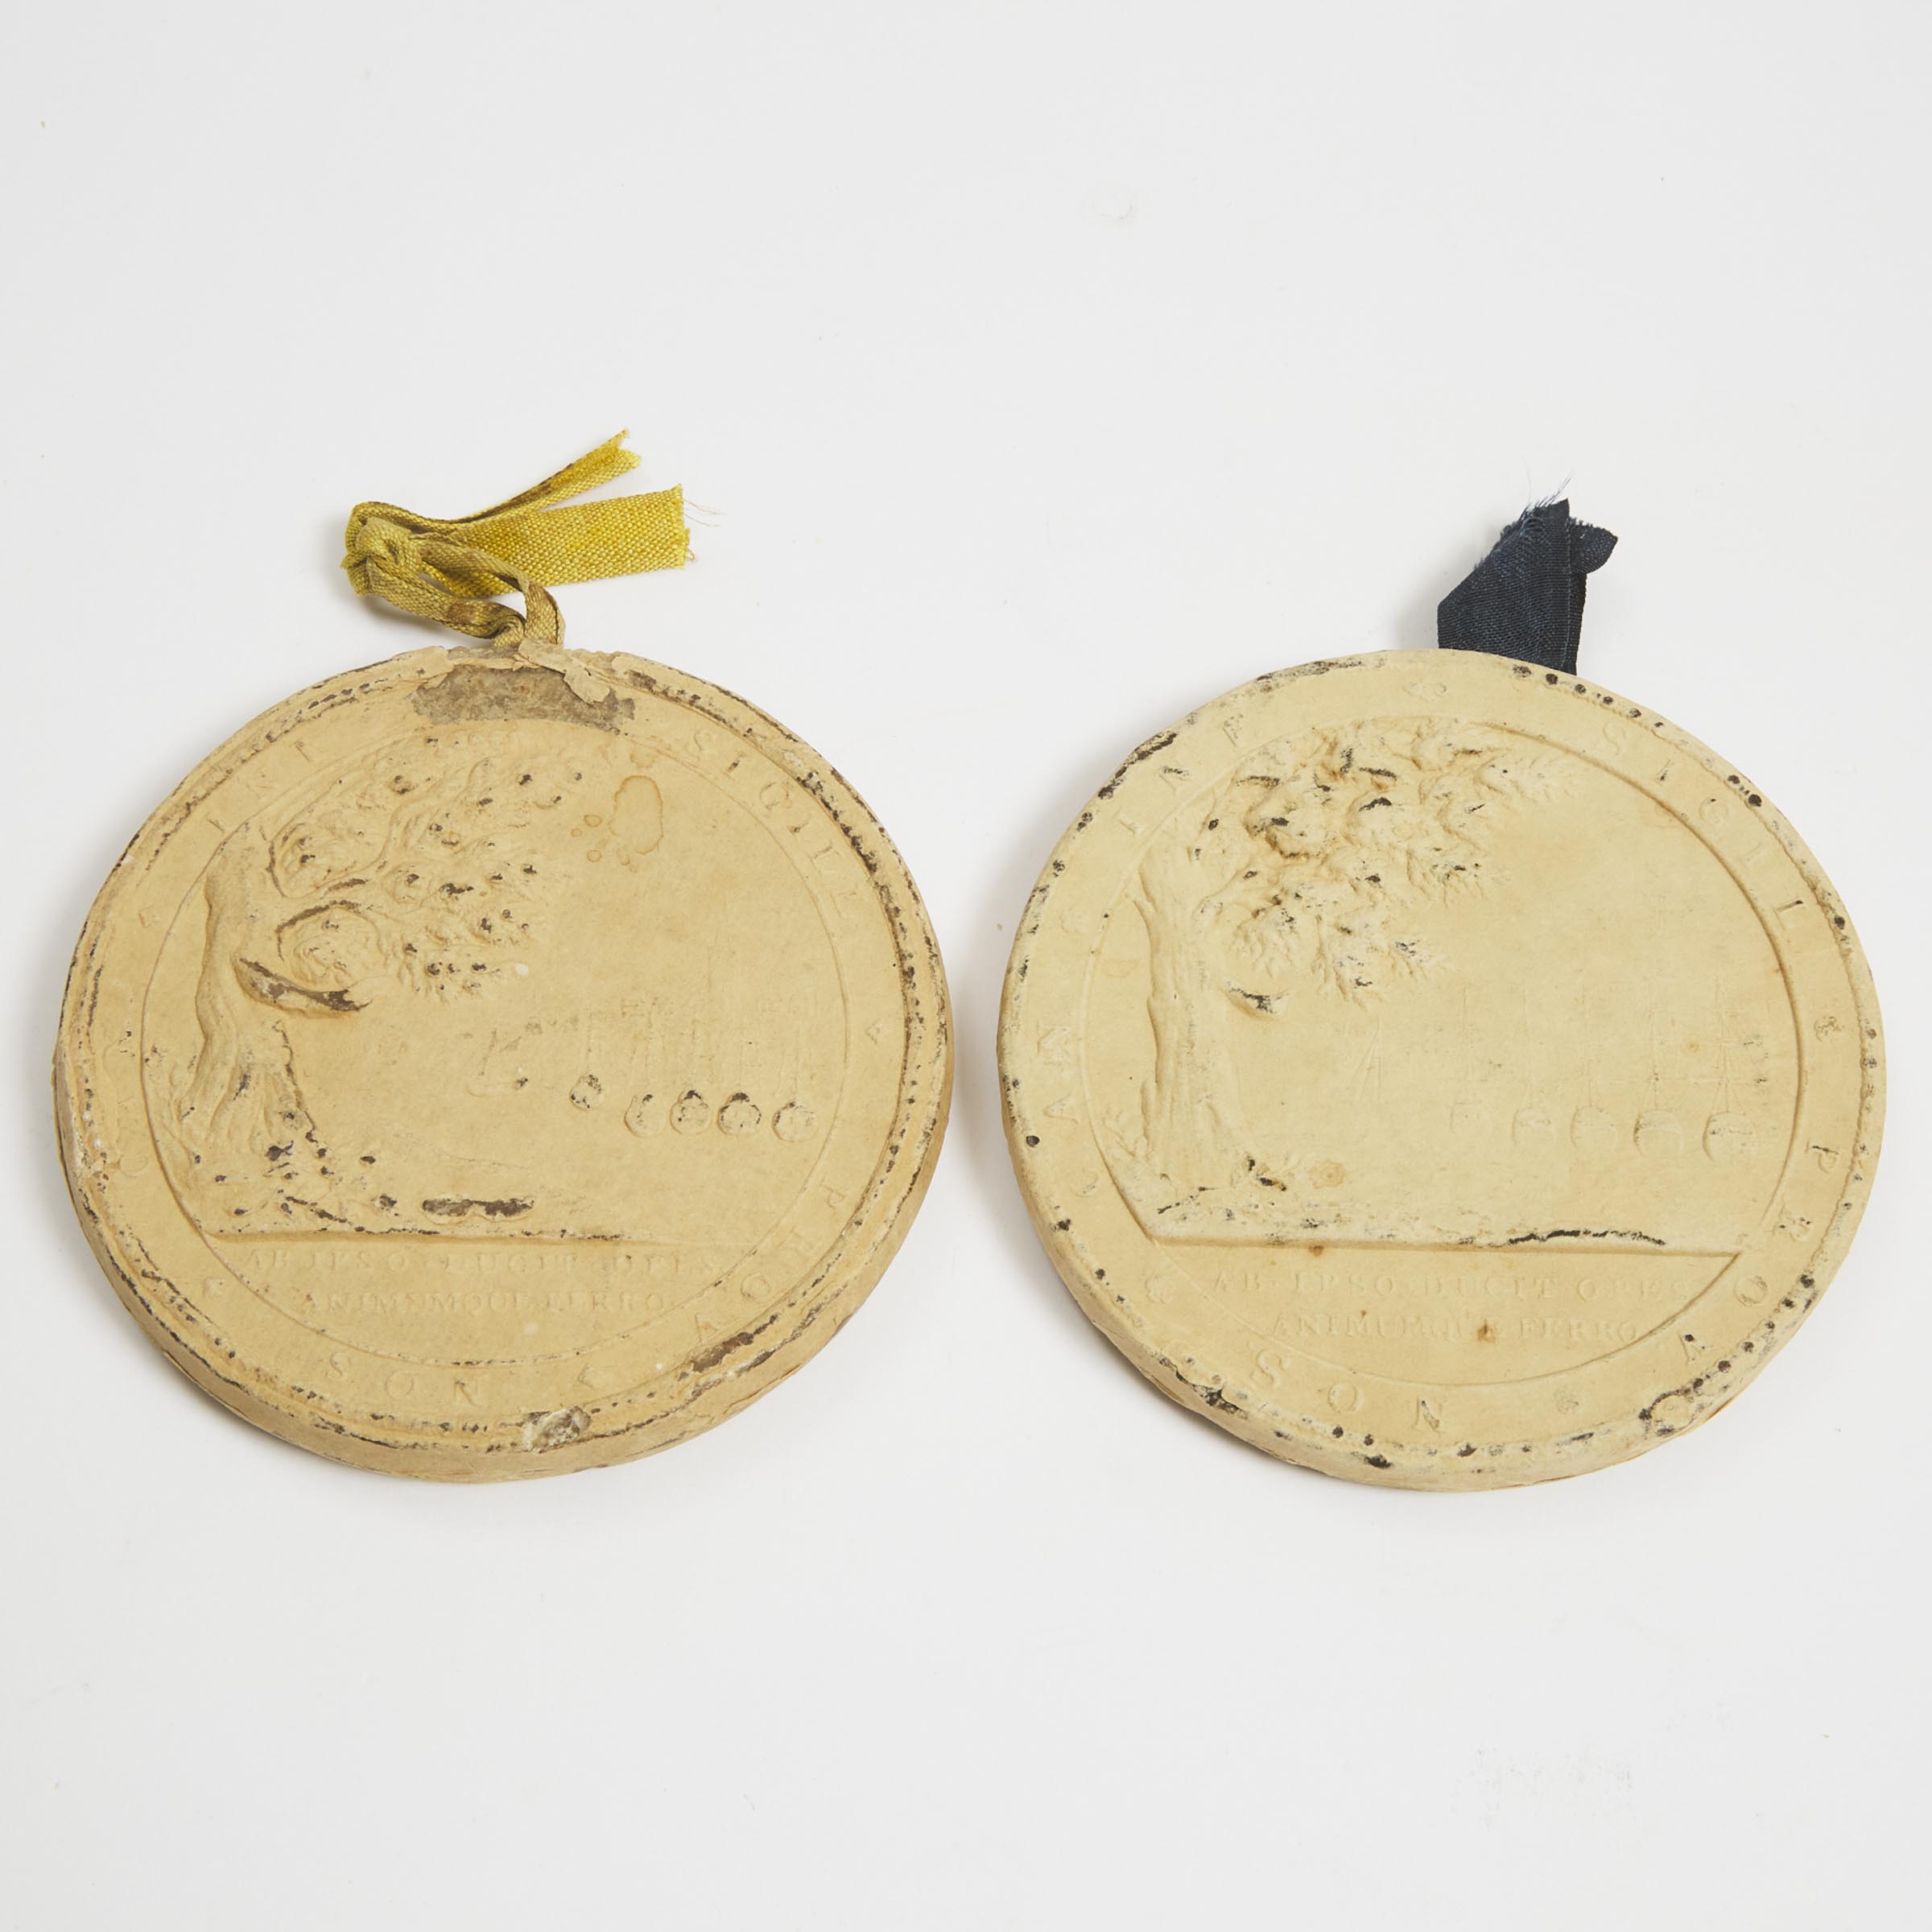 Two Large Document Seals, Lower Canada, early 19th century